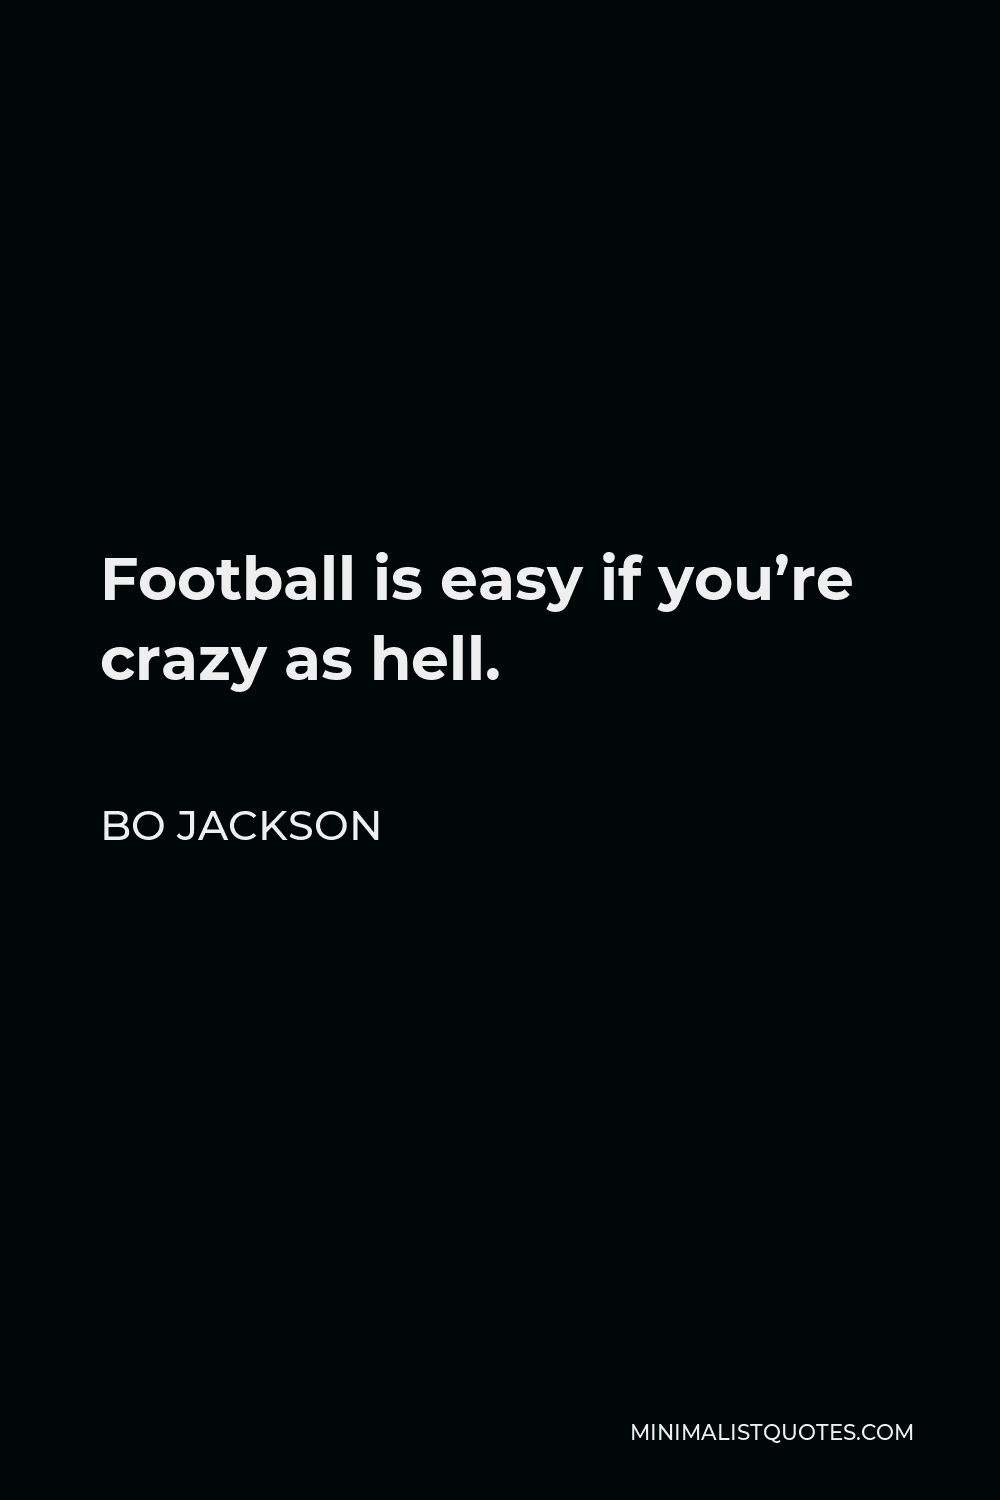 Bo Jackson Quote - Football is easy if you’re crazy as hell.